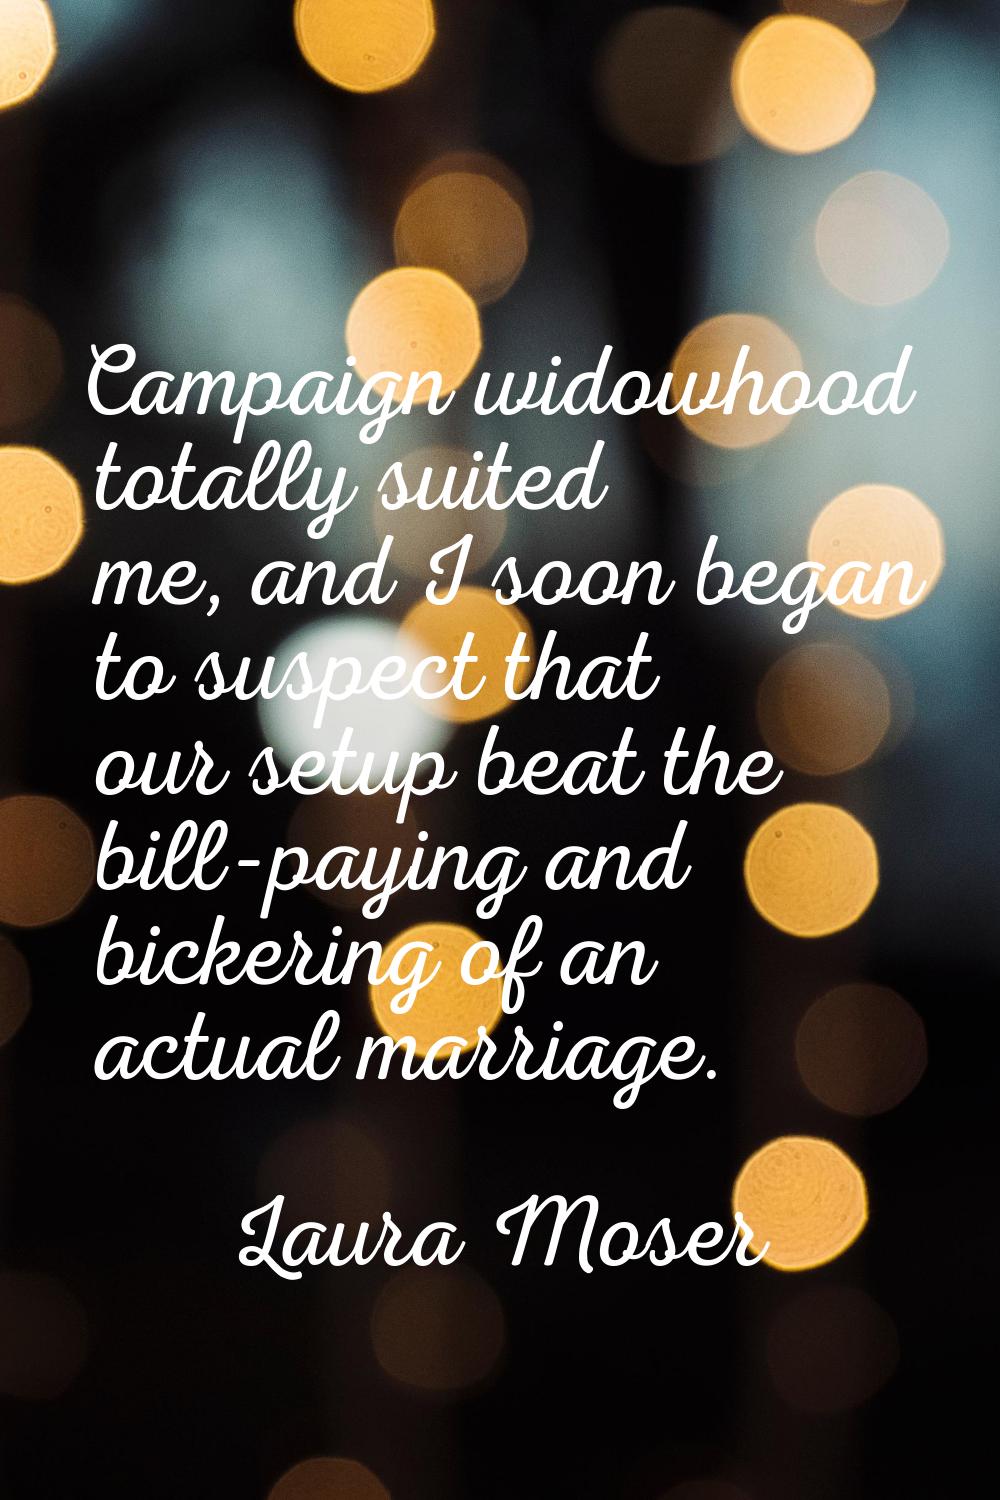 Campaign widowhood totally suited me, and I soon began to suspect that our setup beat the bill-payi